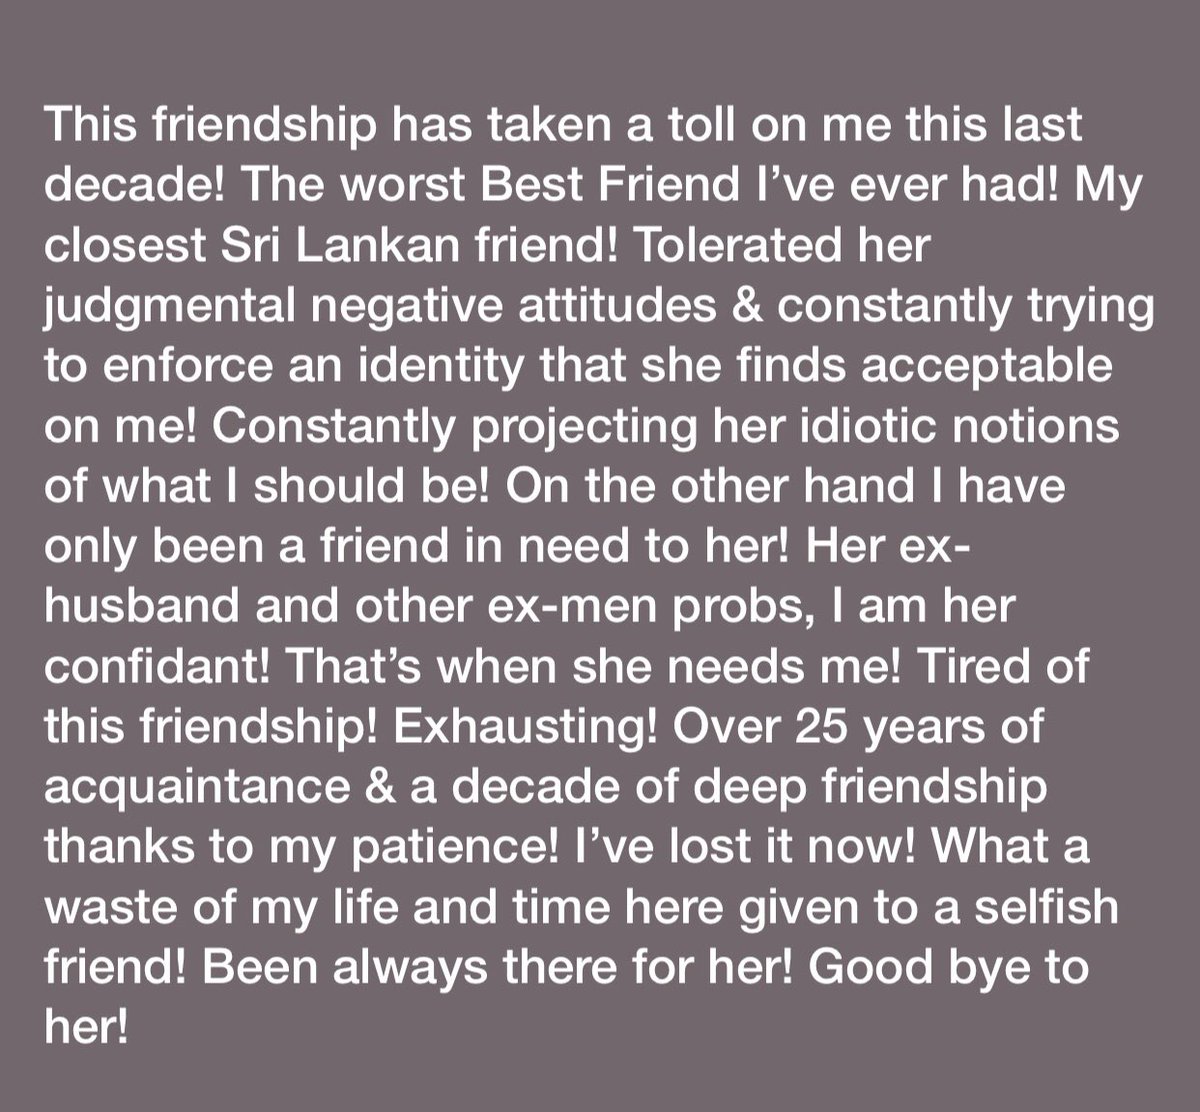 A  #toxic decade long close friendship!Should’ve avoided it way back then!Her then husband was a dick to me,with pain&tears I tolerated him for sake of our friendship!He used her like anything,she came to her senses&divorced!Then among her  #men,I knew  #two,generally good fellas...